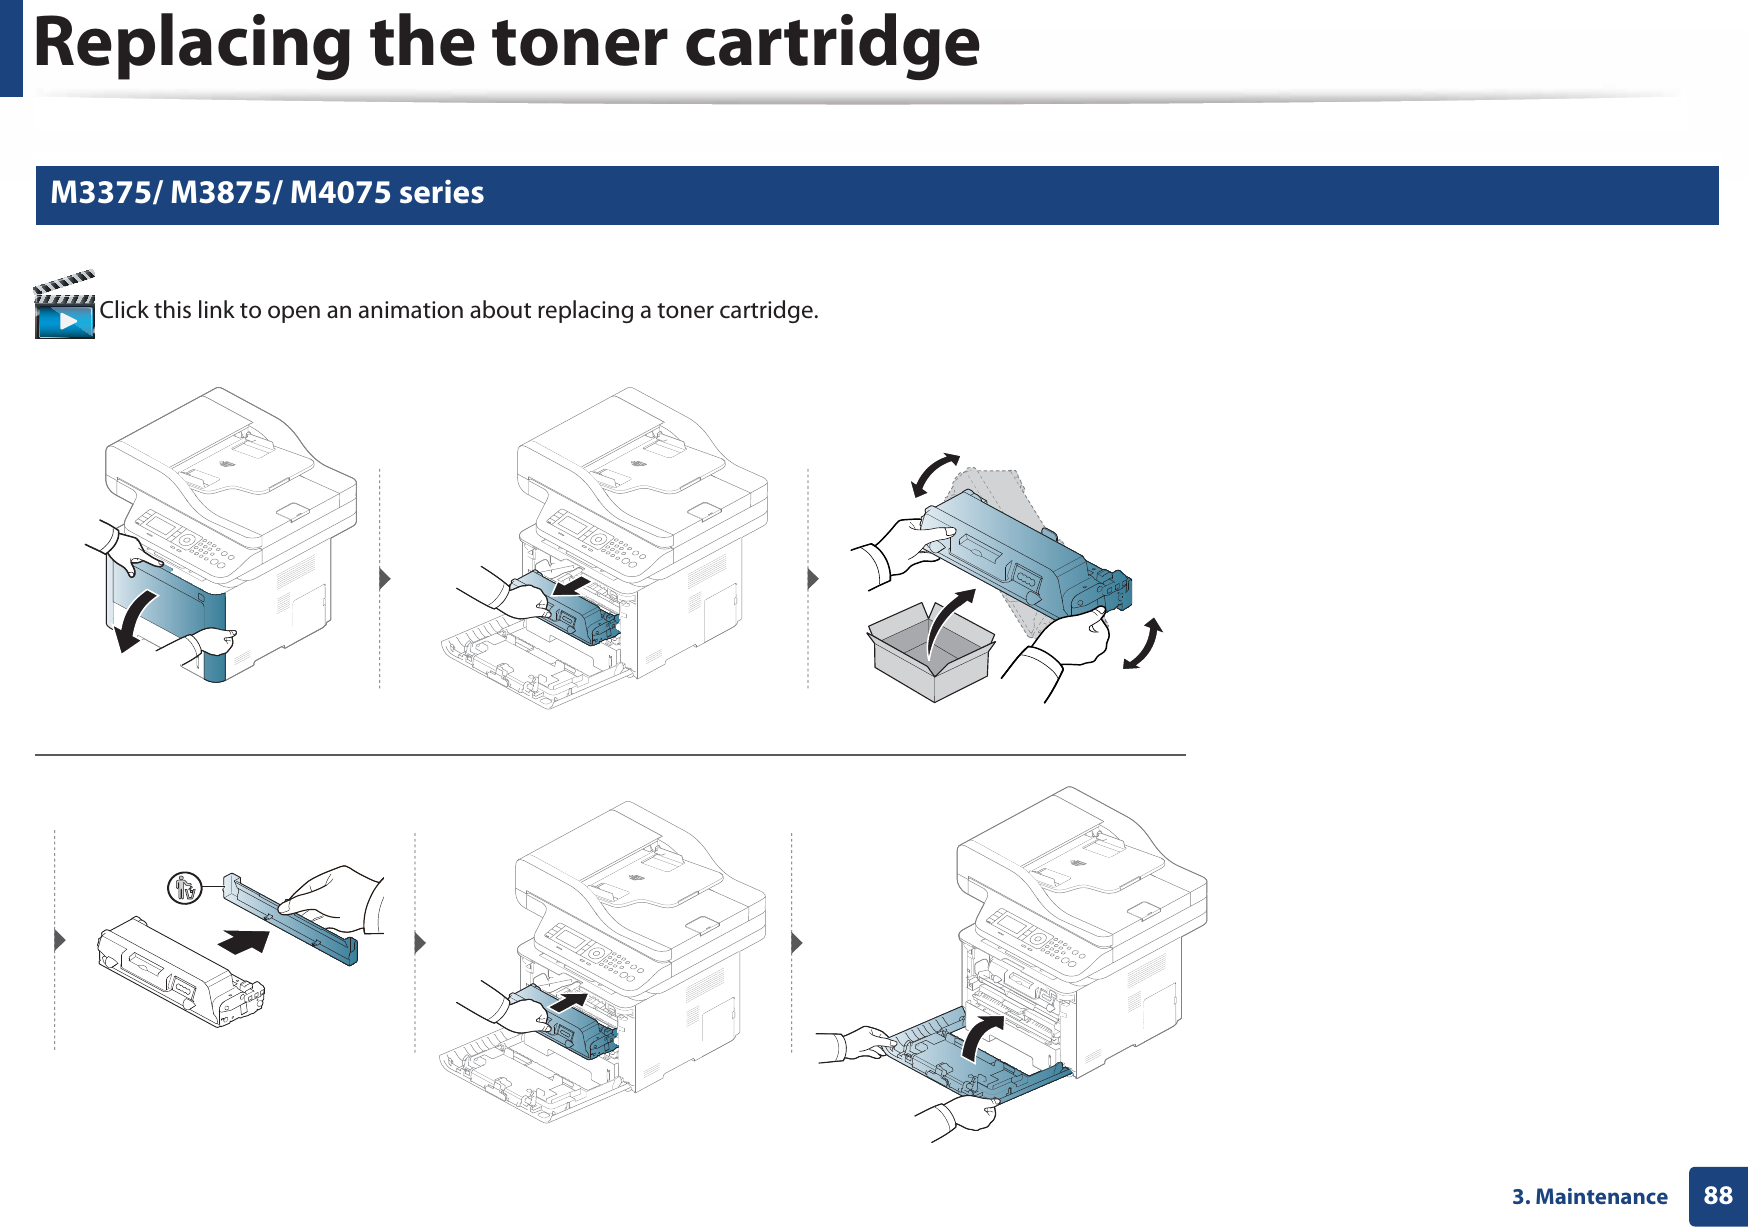 Replacing the toner cartridge883. Maintenance7 M3375/ M3875/ M4075 series Click this link to open an animation about replacing a toner cartridge.